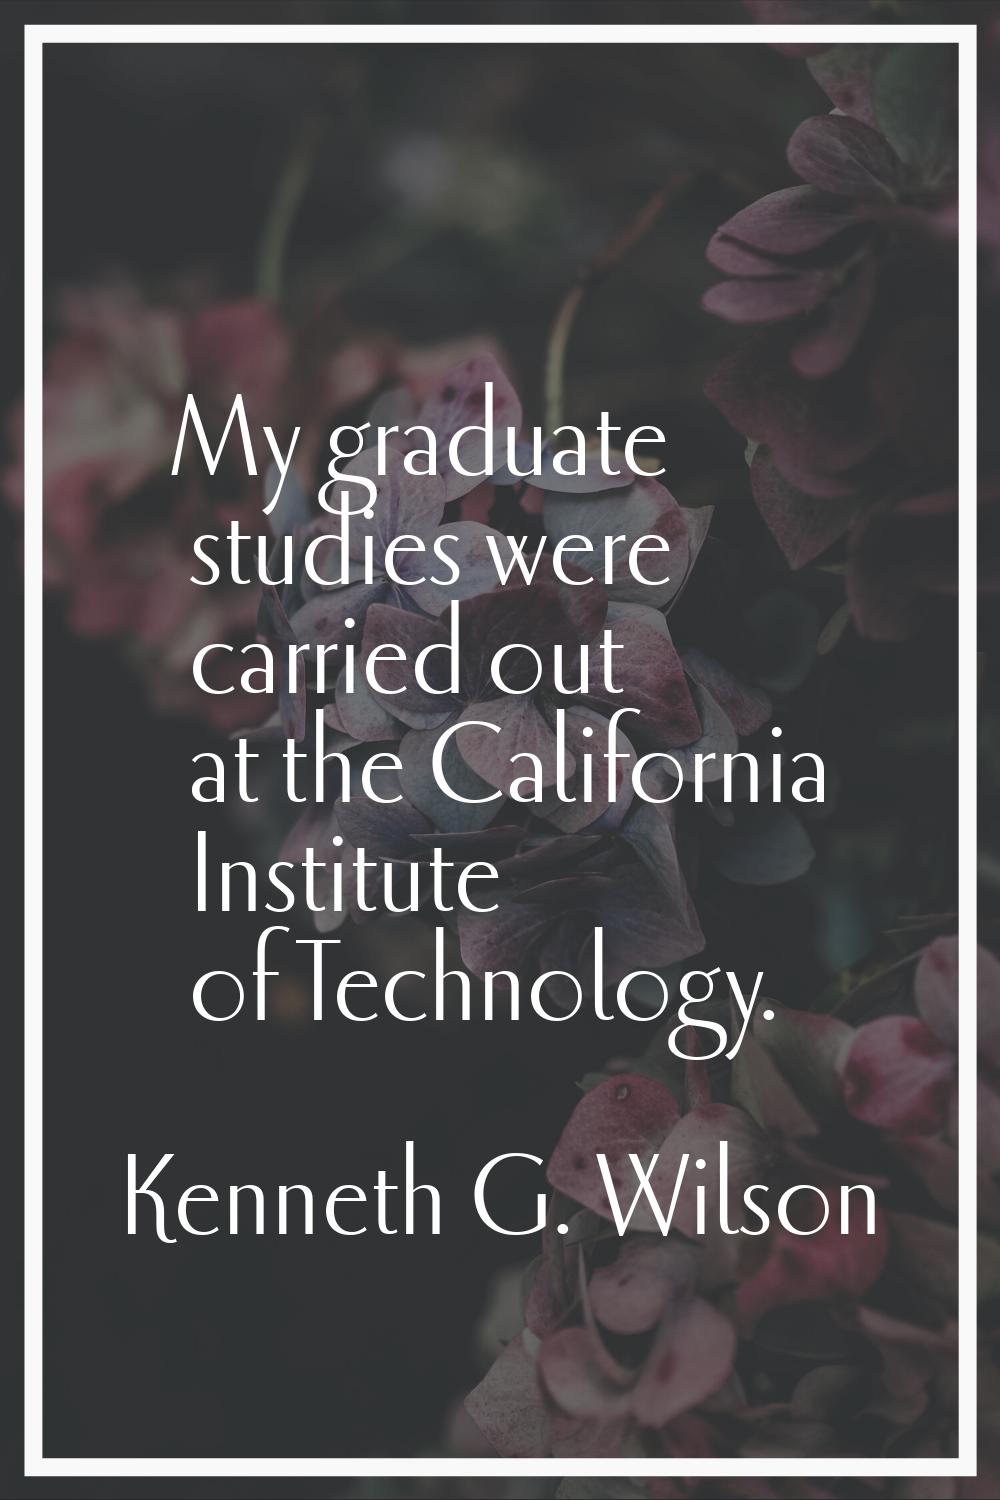 My graduate studies were carried out at the California Institute of Technology.